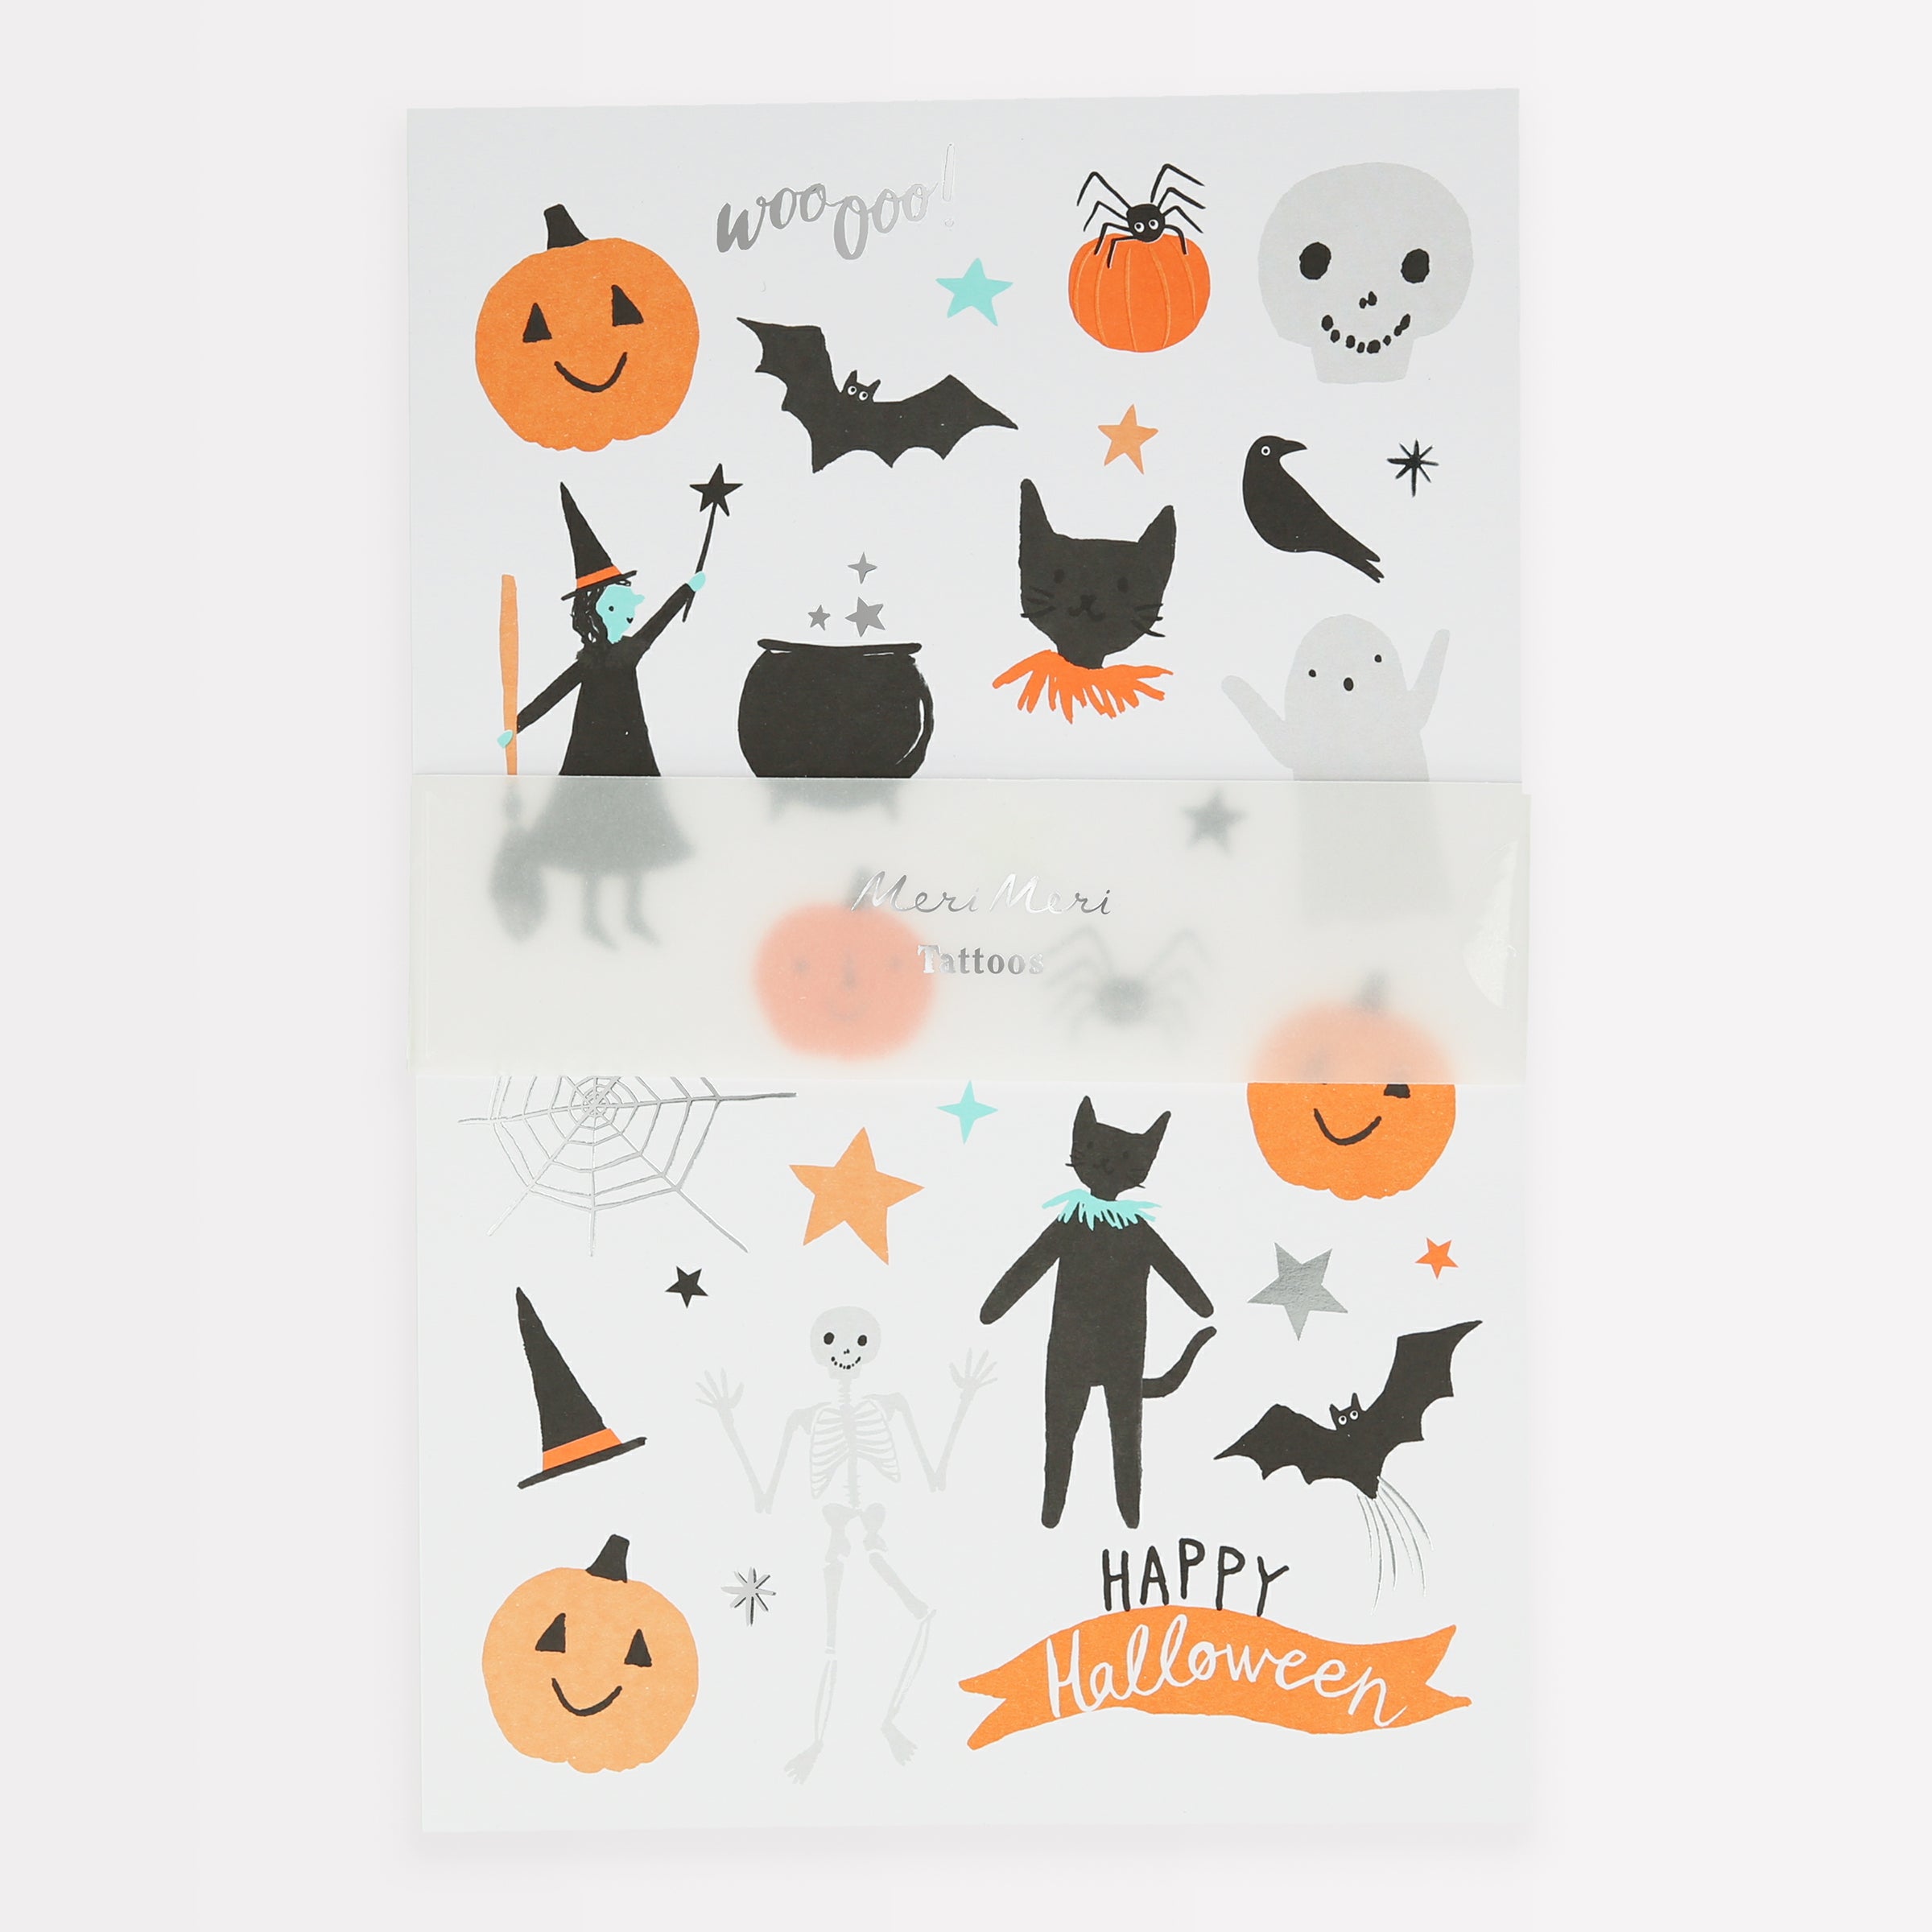 Our temporary tattoos, with Halloween characters, are perfect to add to your Halloween party supplies.